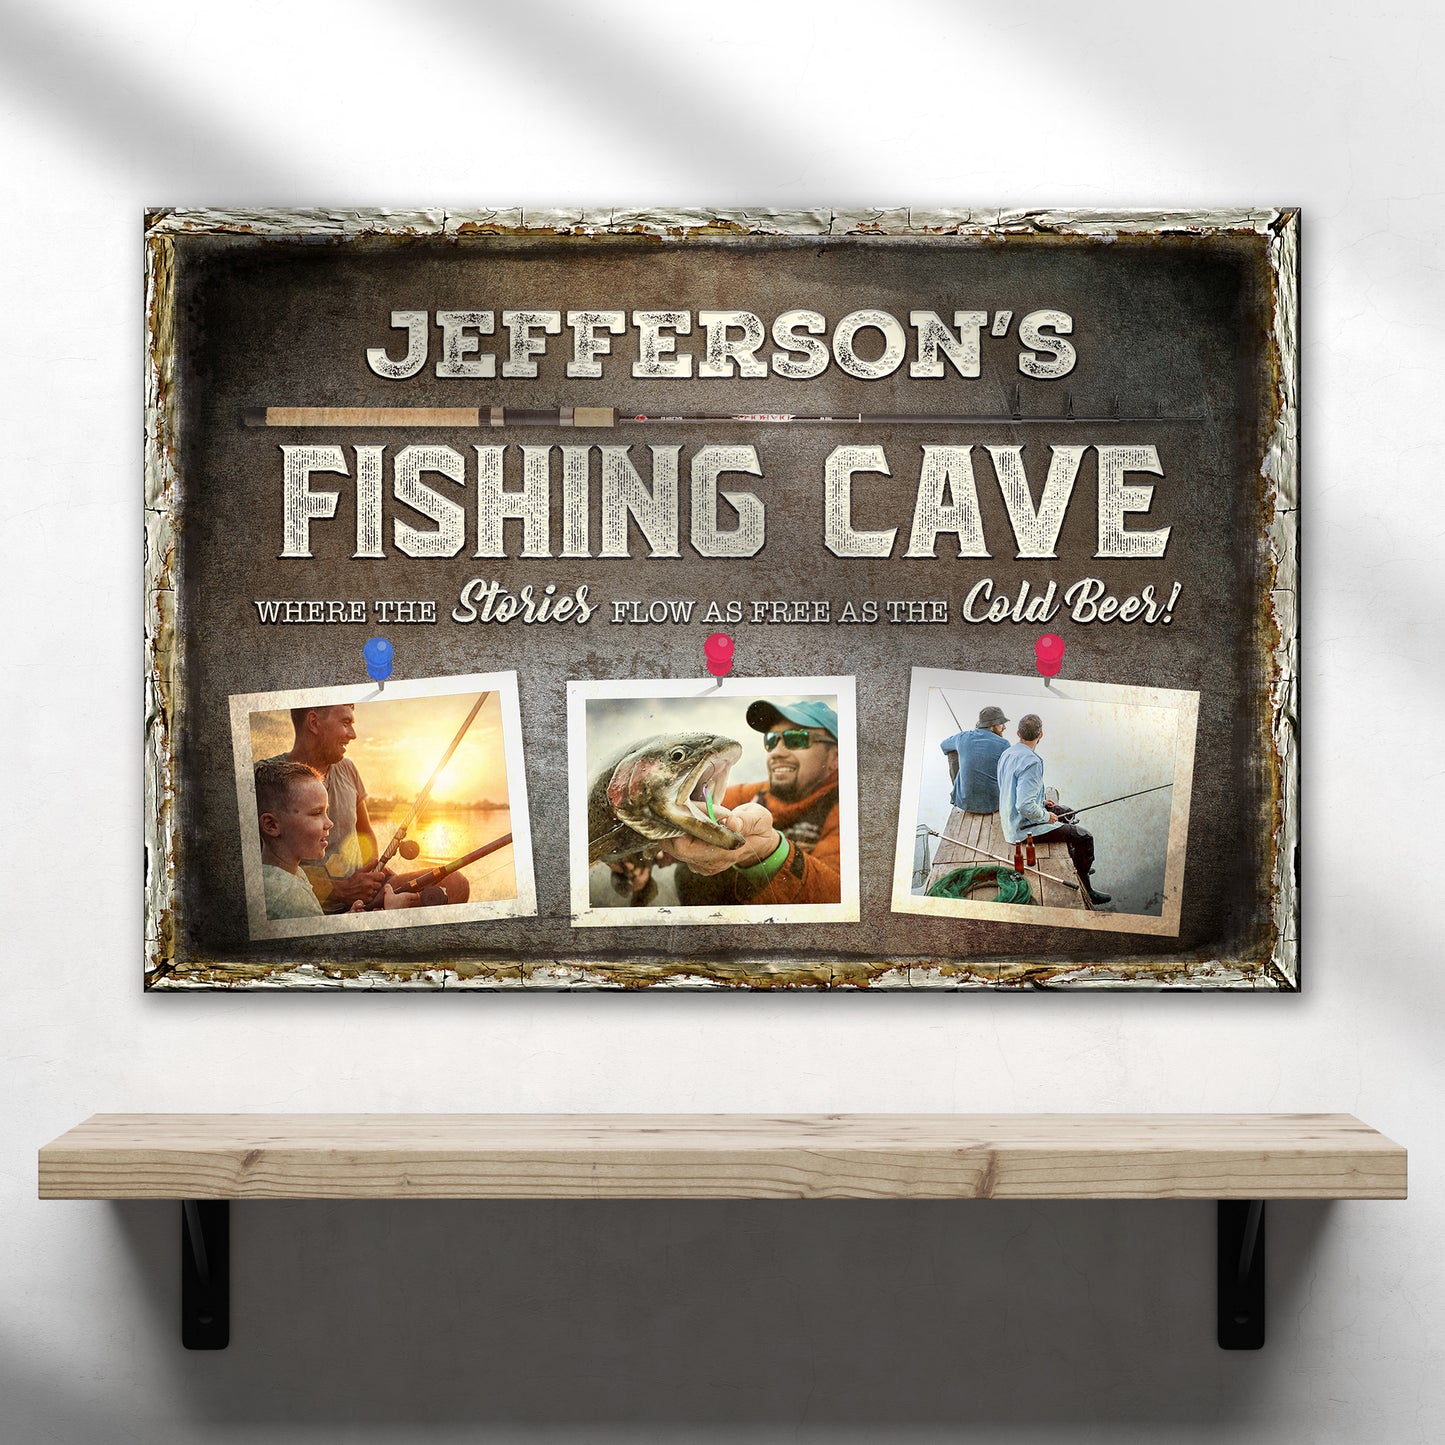 Fishing Cave Sign - Image by Tailored Canvases